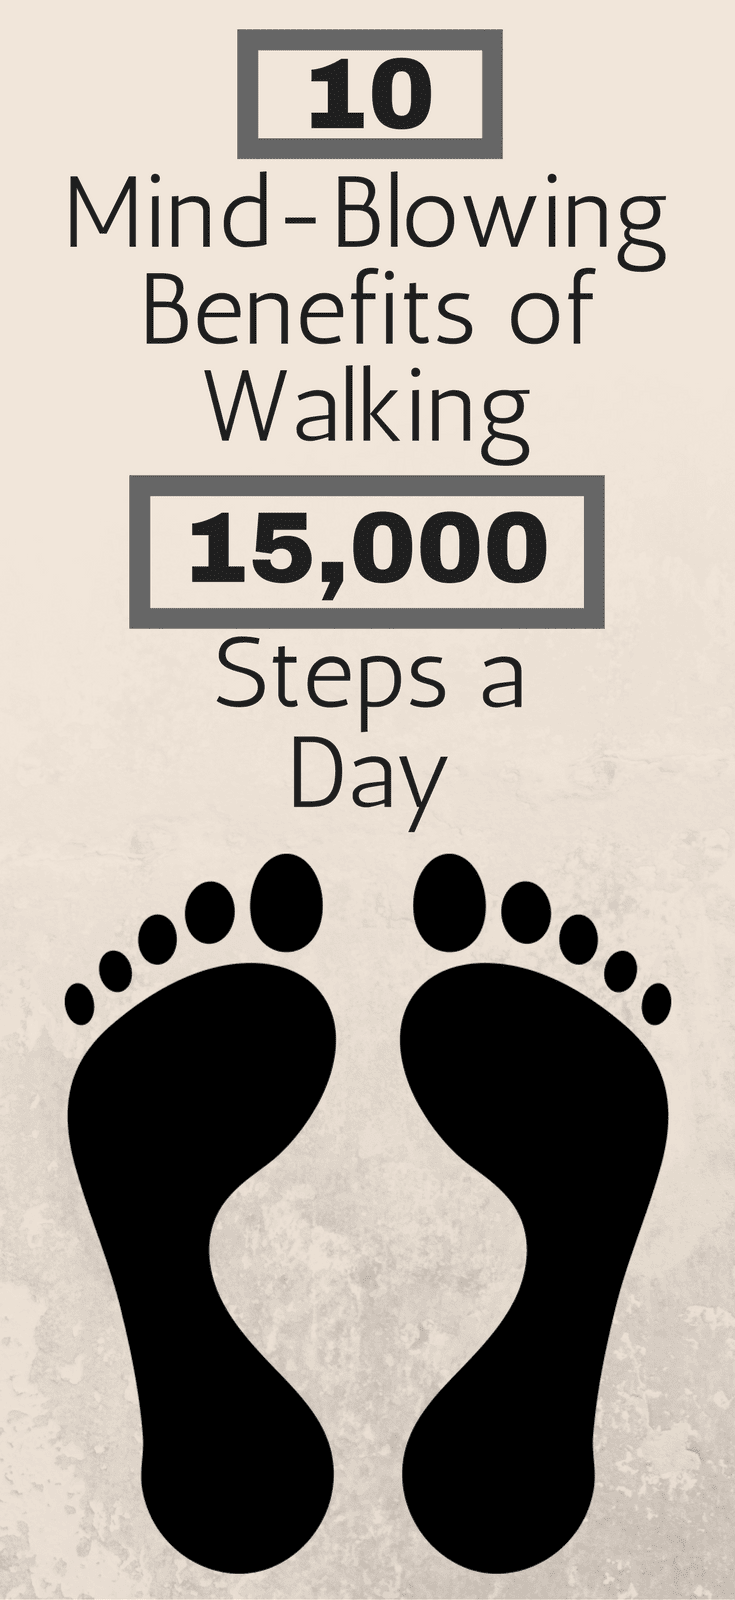 10 Mind-Blowing Benefits Of Walking 15,000 Steps A Day